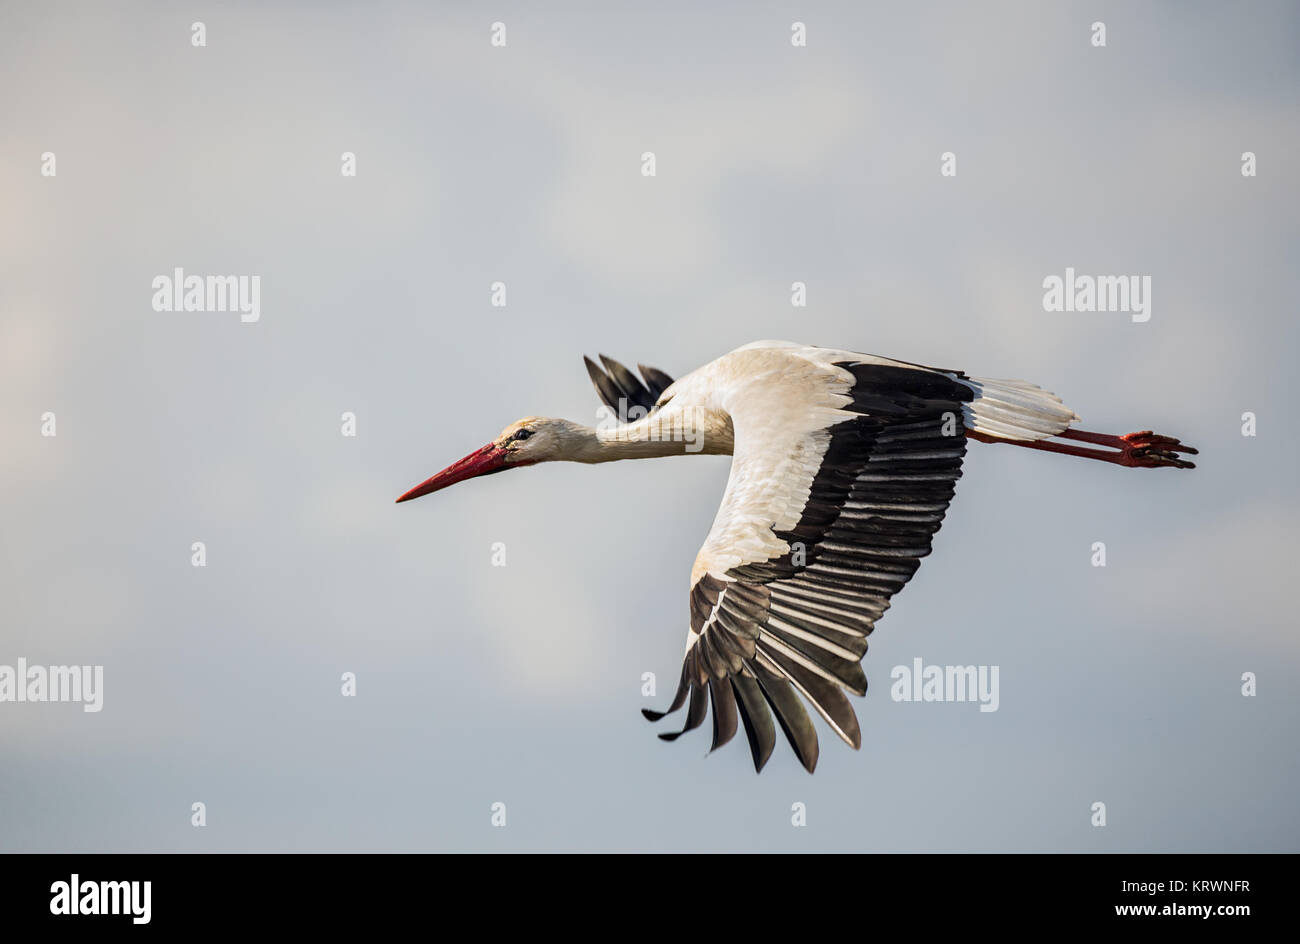 Stork photographed in their natural environment. Stock Photo